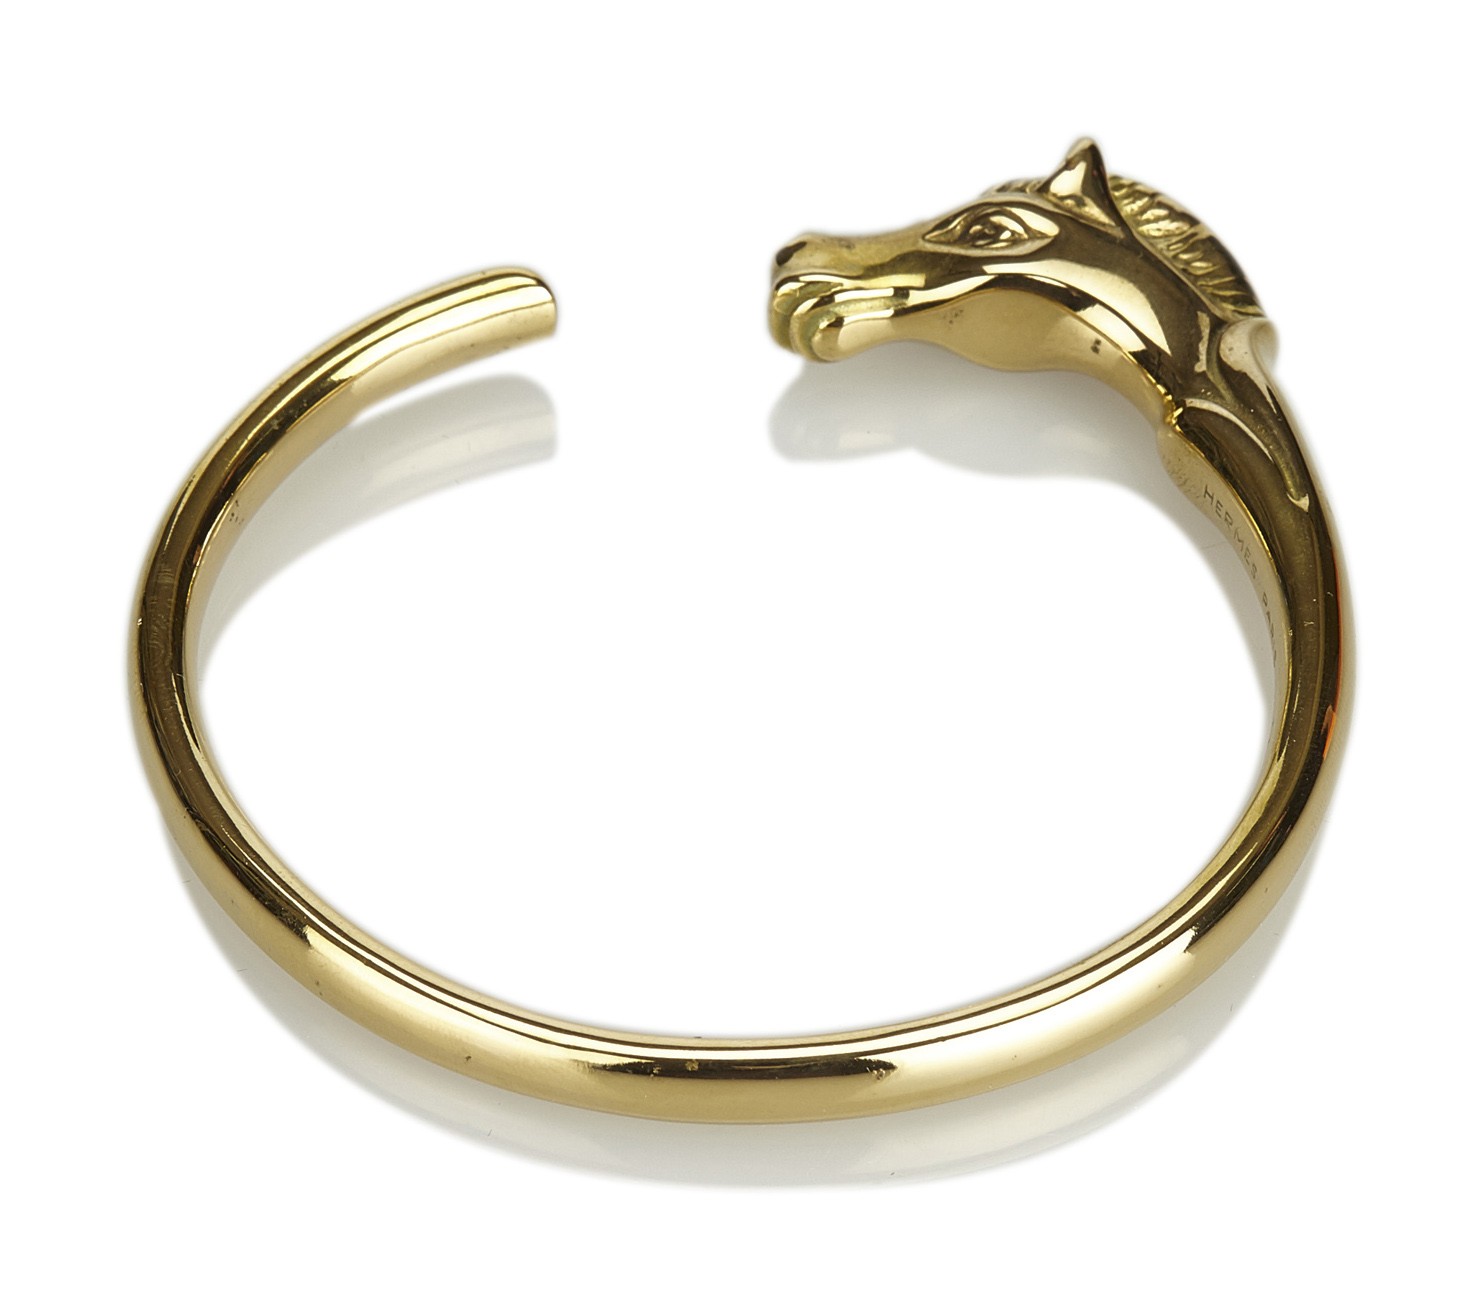 Authentic! Vintage Hermes 18k Yellow Gold Horse Band Ring Auction